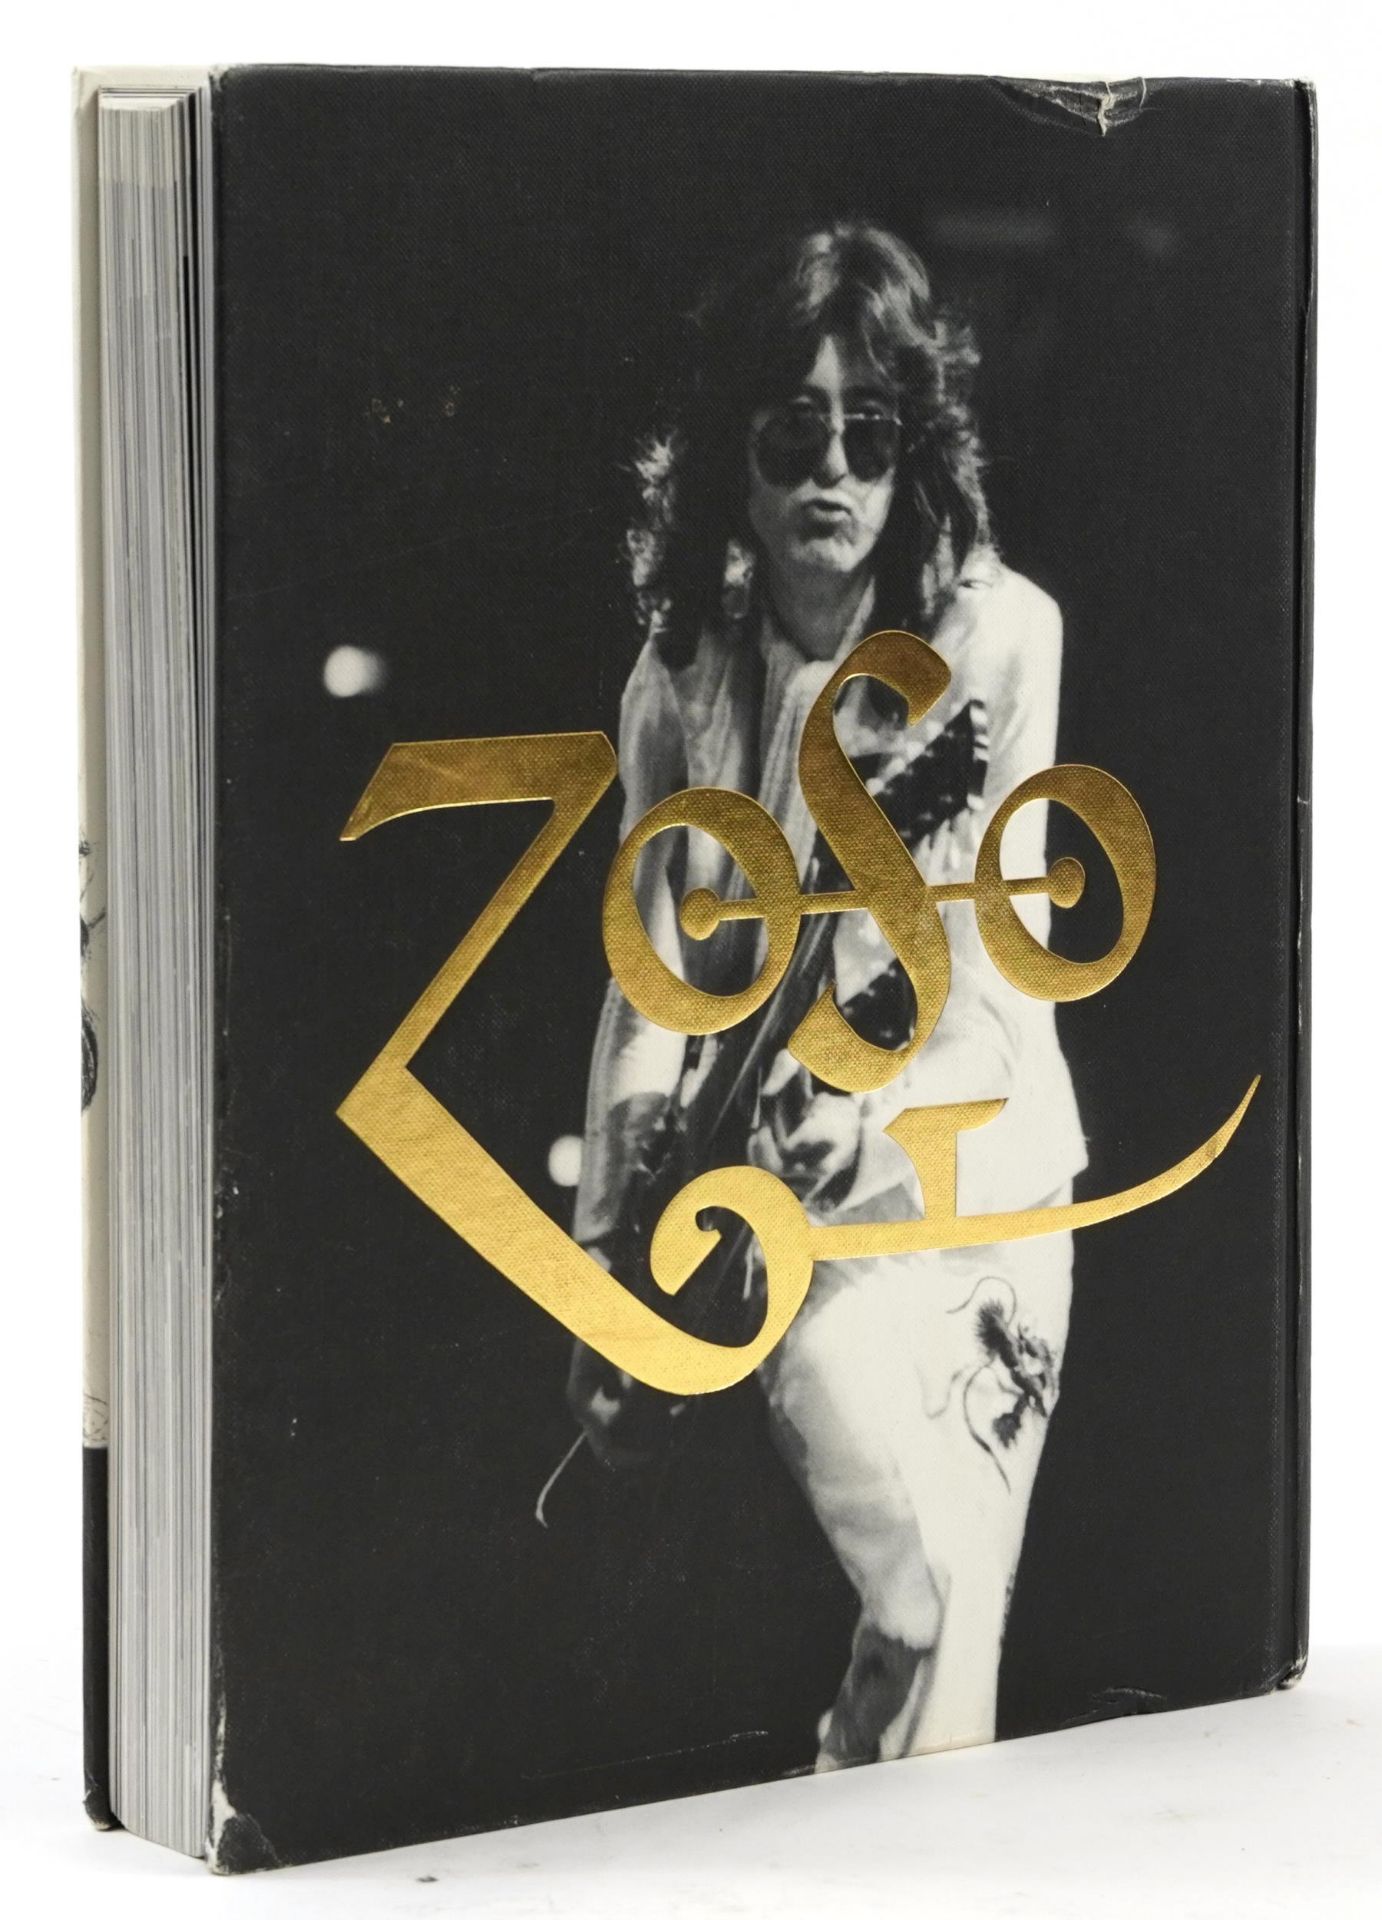 Jimmy Page by Jimmy Page, hardback book signed by Jimmy Page and inscribed Cole really good - Image 4 of 4